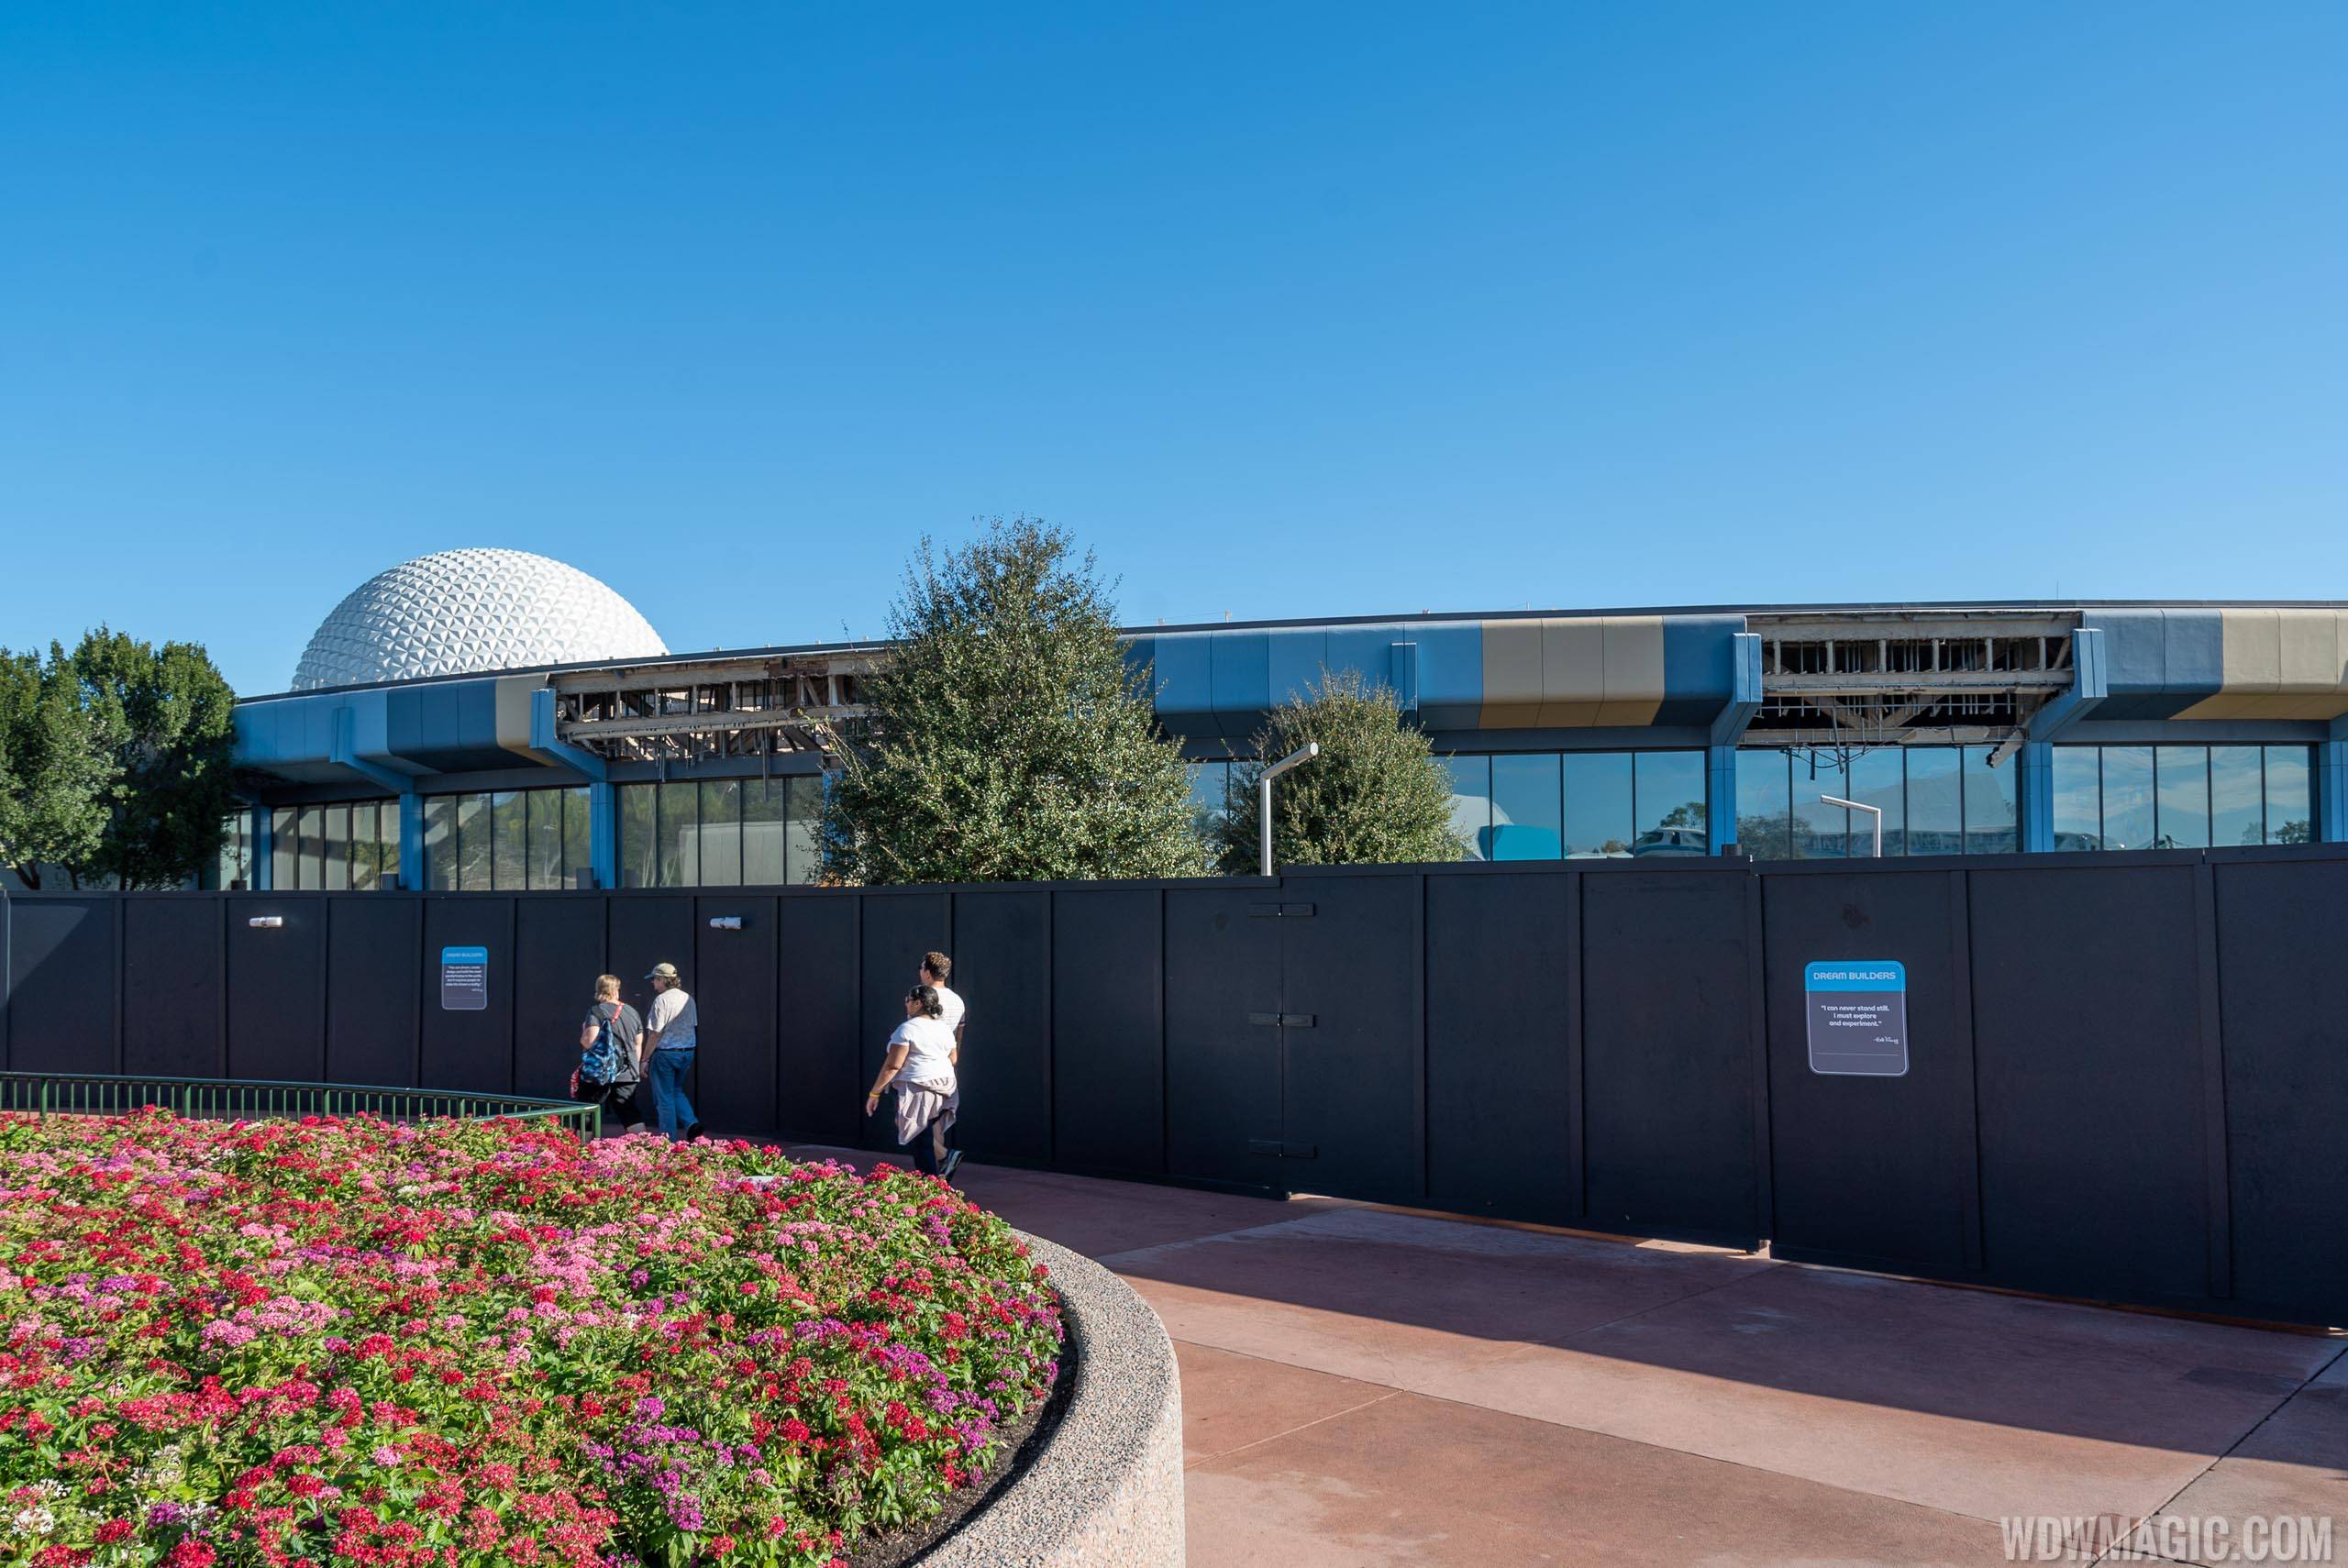 Epcot Future World West Demolition and Construction Walls - December 6 2019